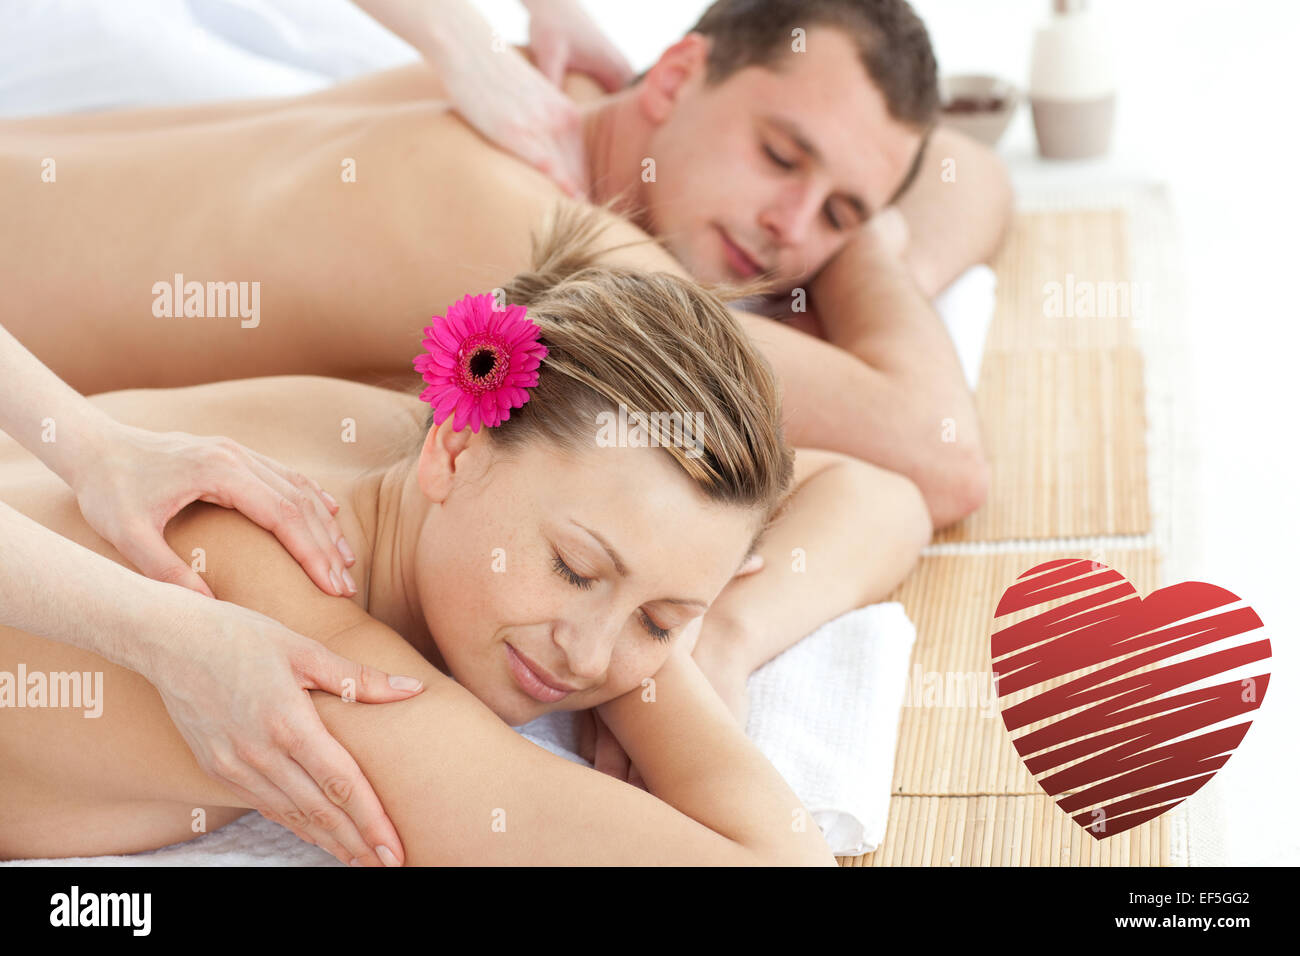 Composite image of relaxing couple having a massage Stock Photo